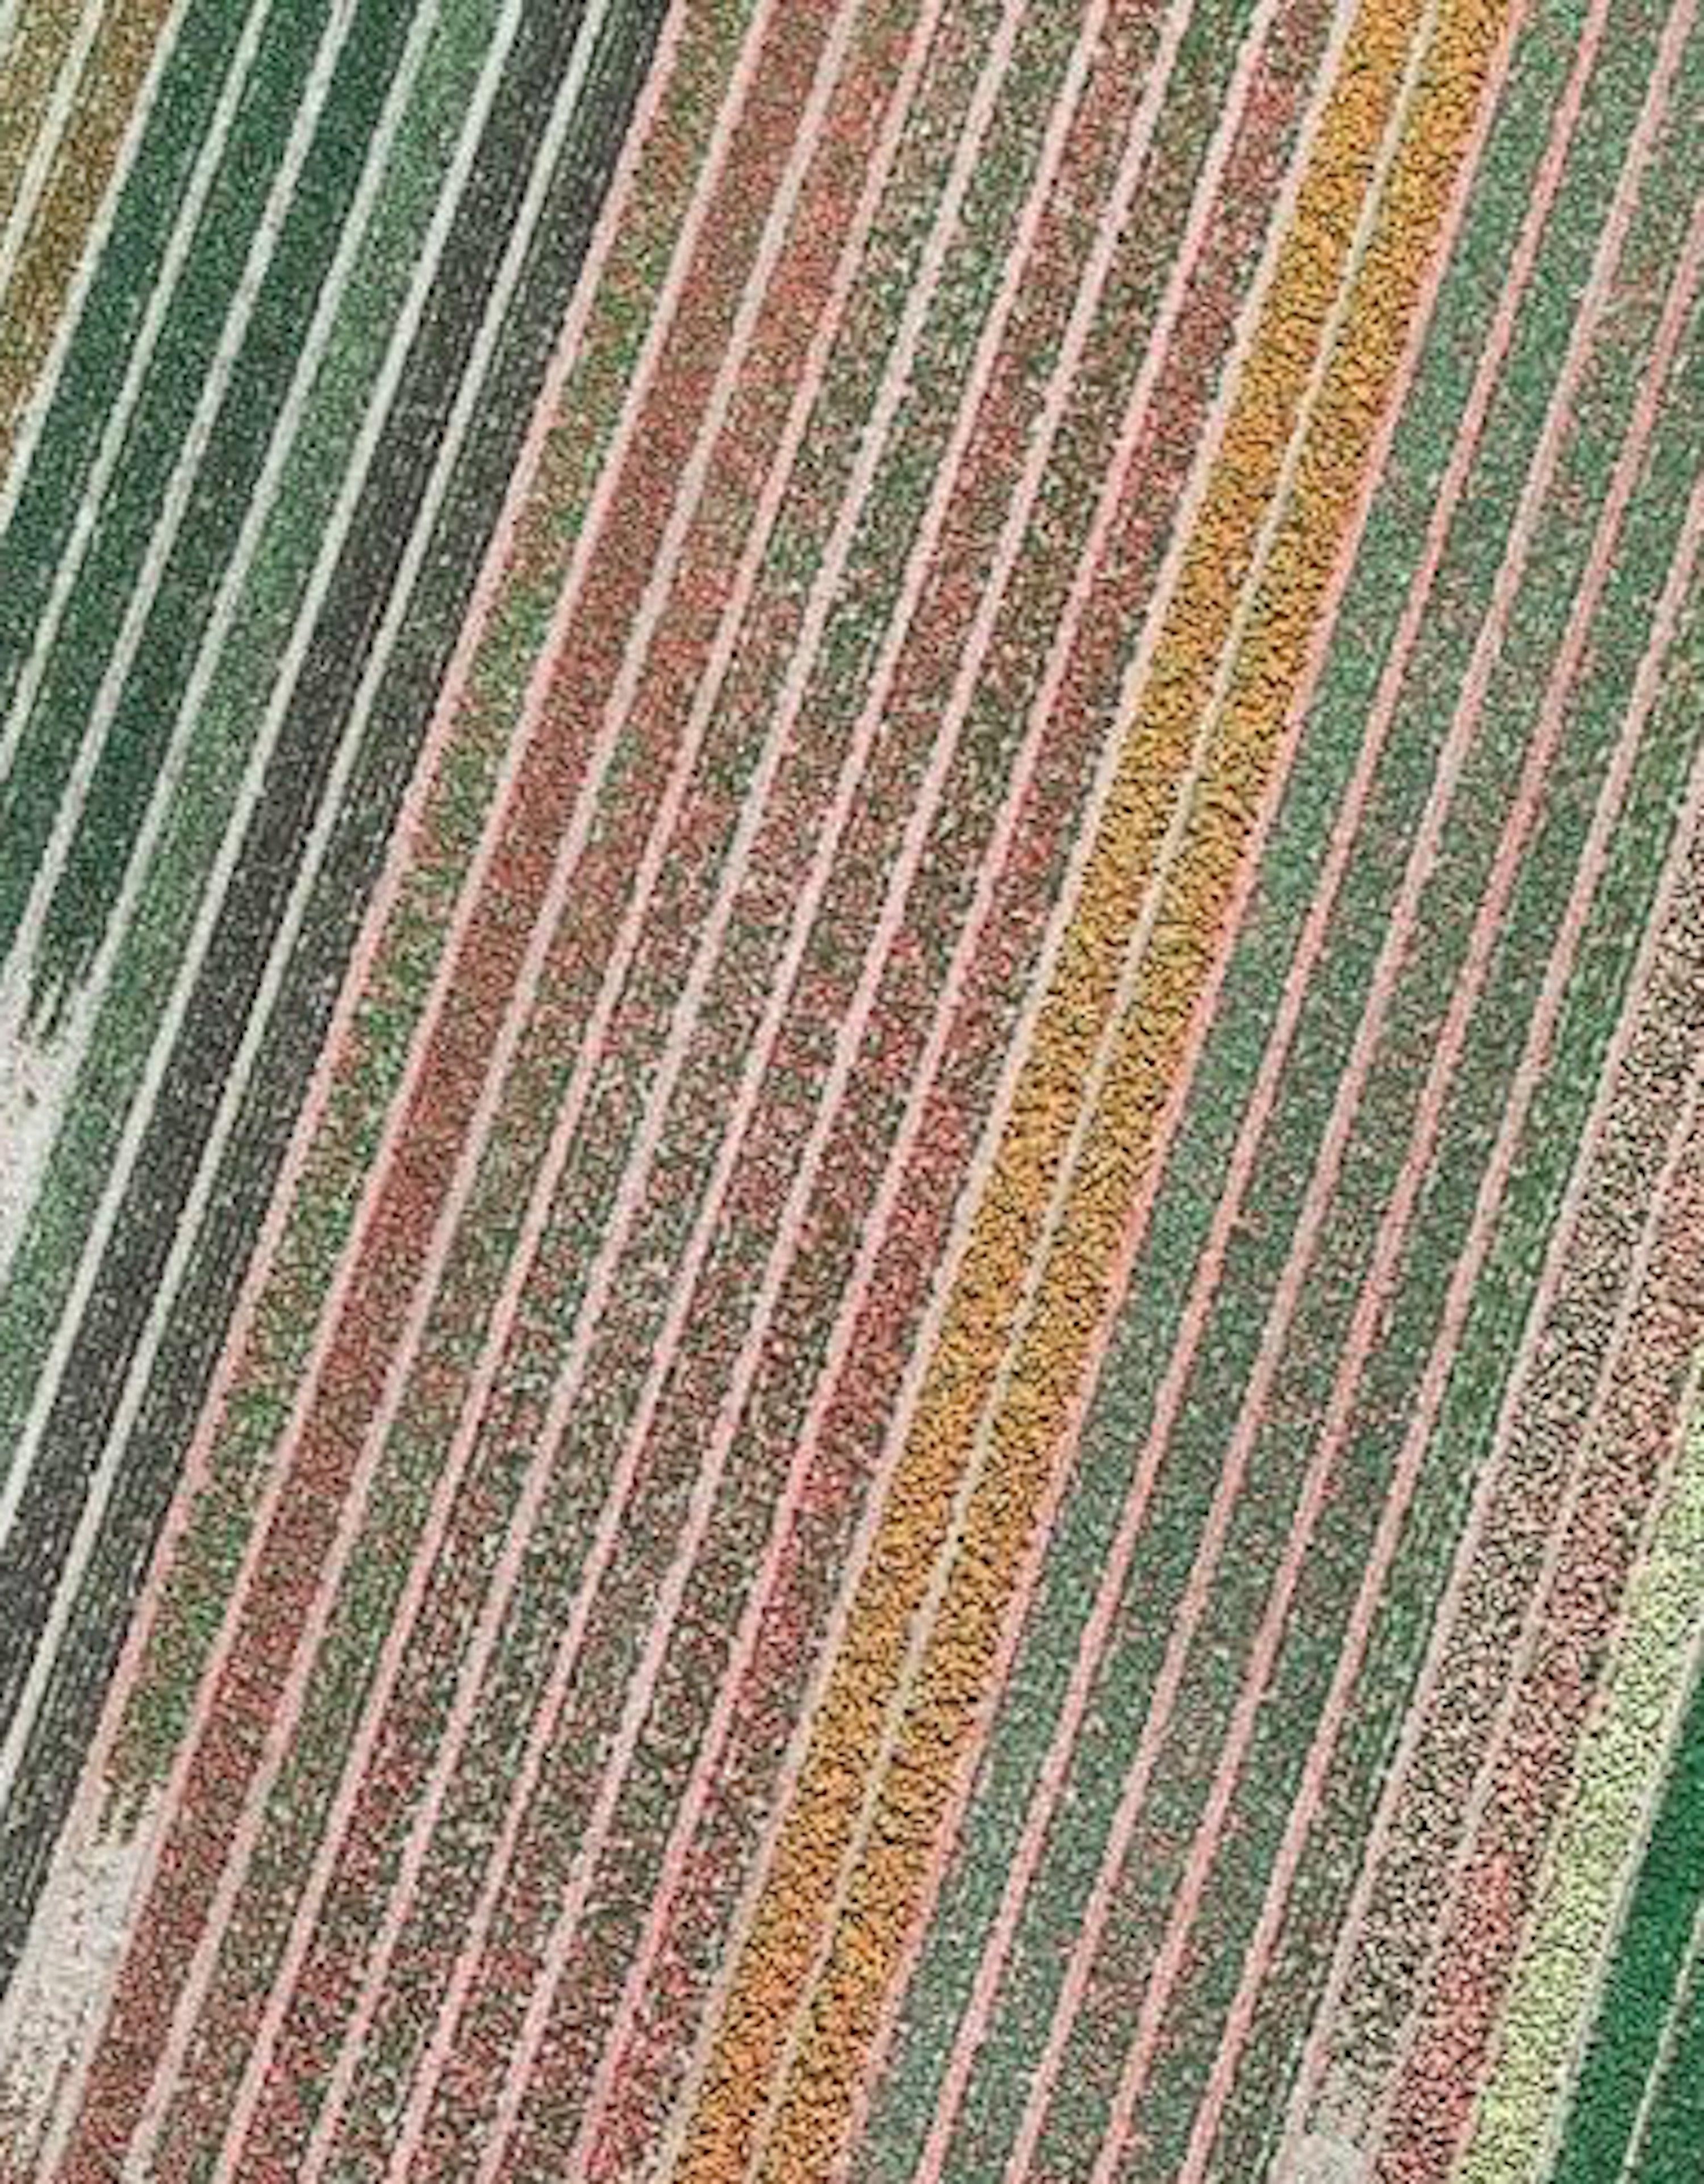 Tulip Fields 10 by Bernhard Lang - Aerial abstract photography, Netherlands For Sale 3